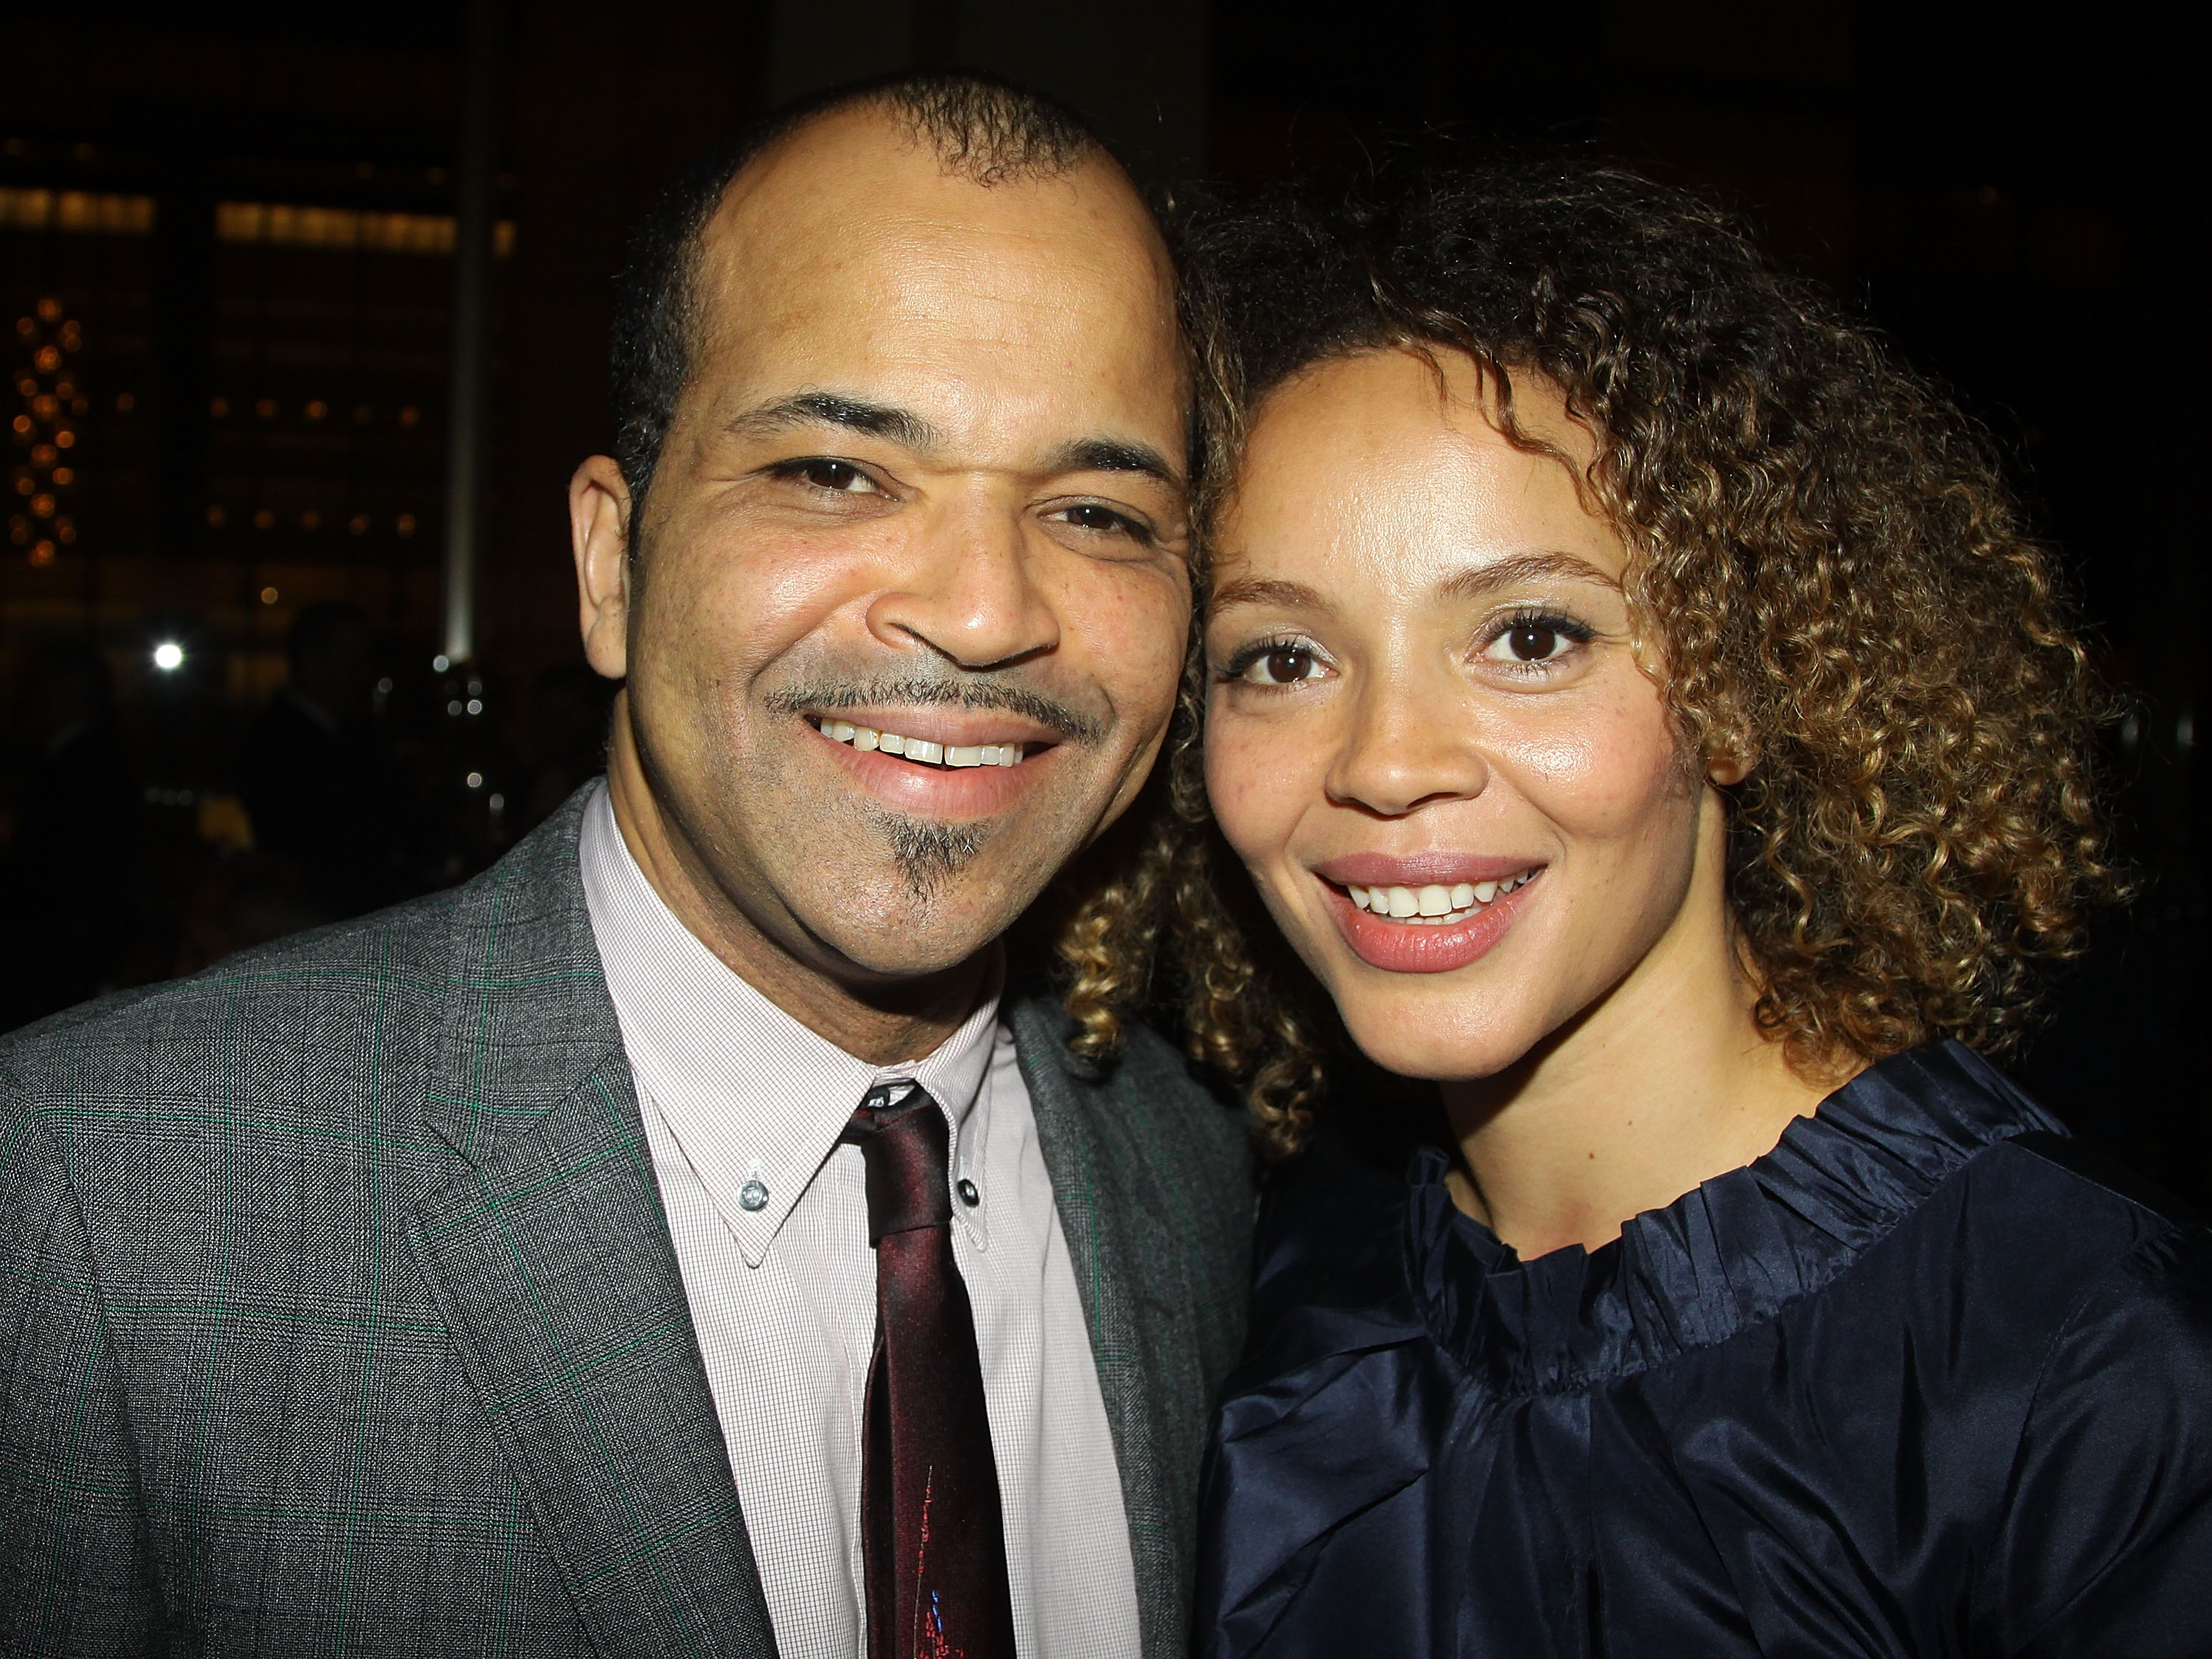 Actor Jeffrey Wright and wife actress Carmen Ejogo attend the Opening Night party for "Free Man Of Color" at Avery Fisher Hall, Lincoln Center on November 18, 2010 in New York City | Source: Getty Images